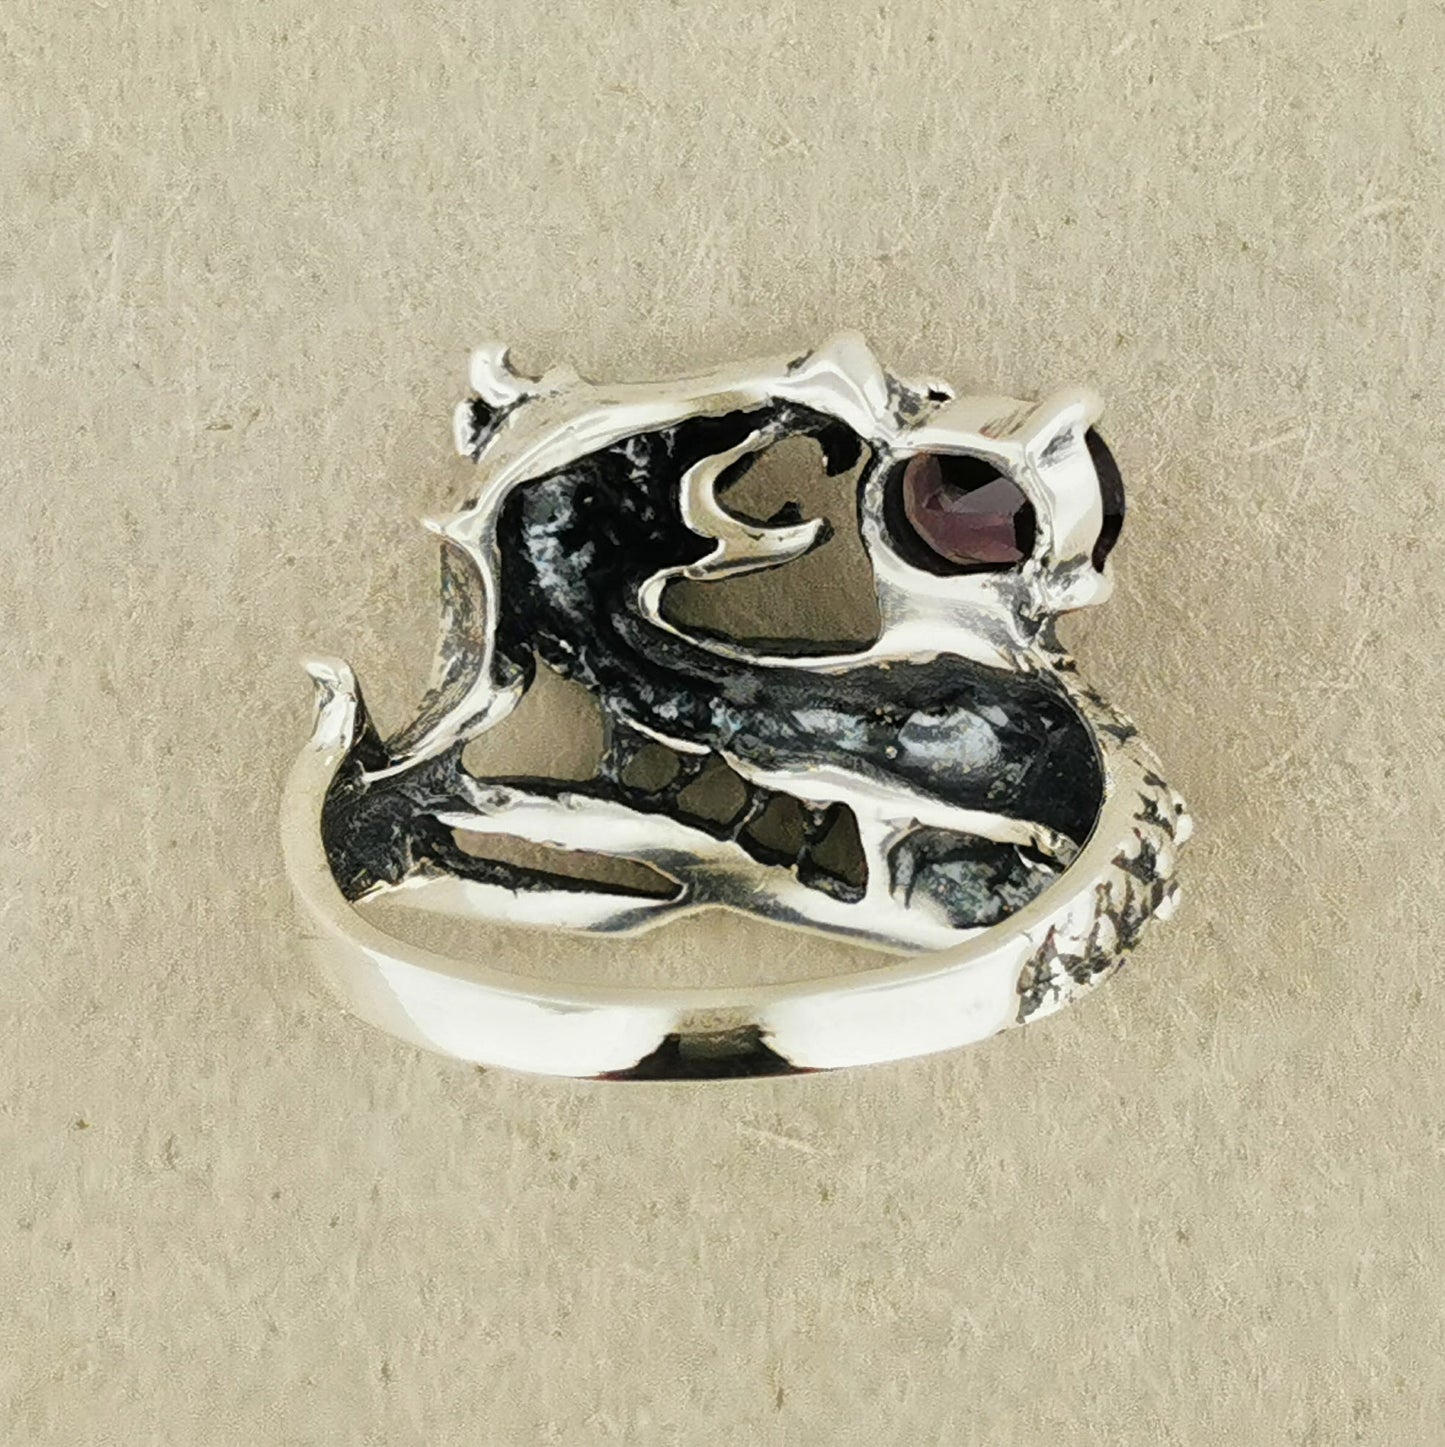 Dragon Ring with Oval Gemstone in Sterling Silver, Birthstone Dragon Ring, Dragon Ring for Him and Her, Silver Dragon Jewellery, Unisex Dragon Ring, Silver Dragon Ring, Vintage Dragon Ring, Gemstone Dragon Ring, Sterling Silver Dragon Ring